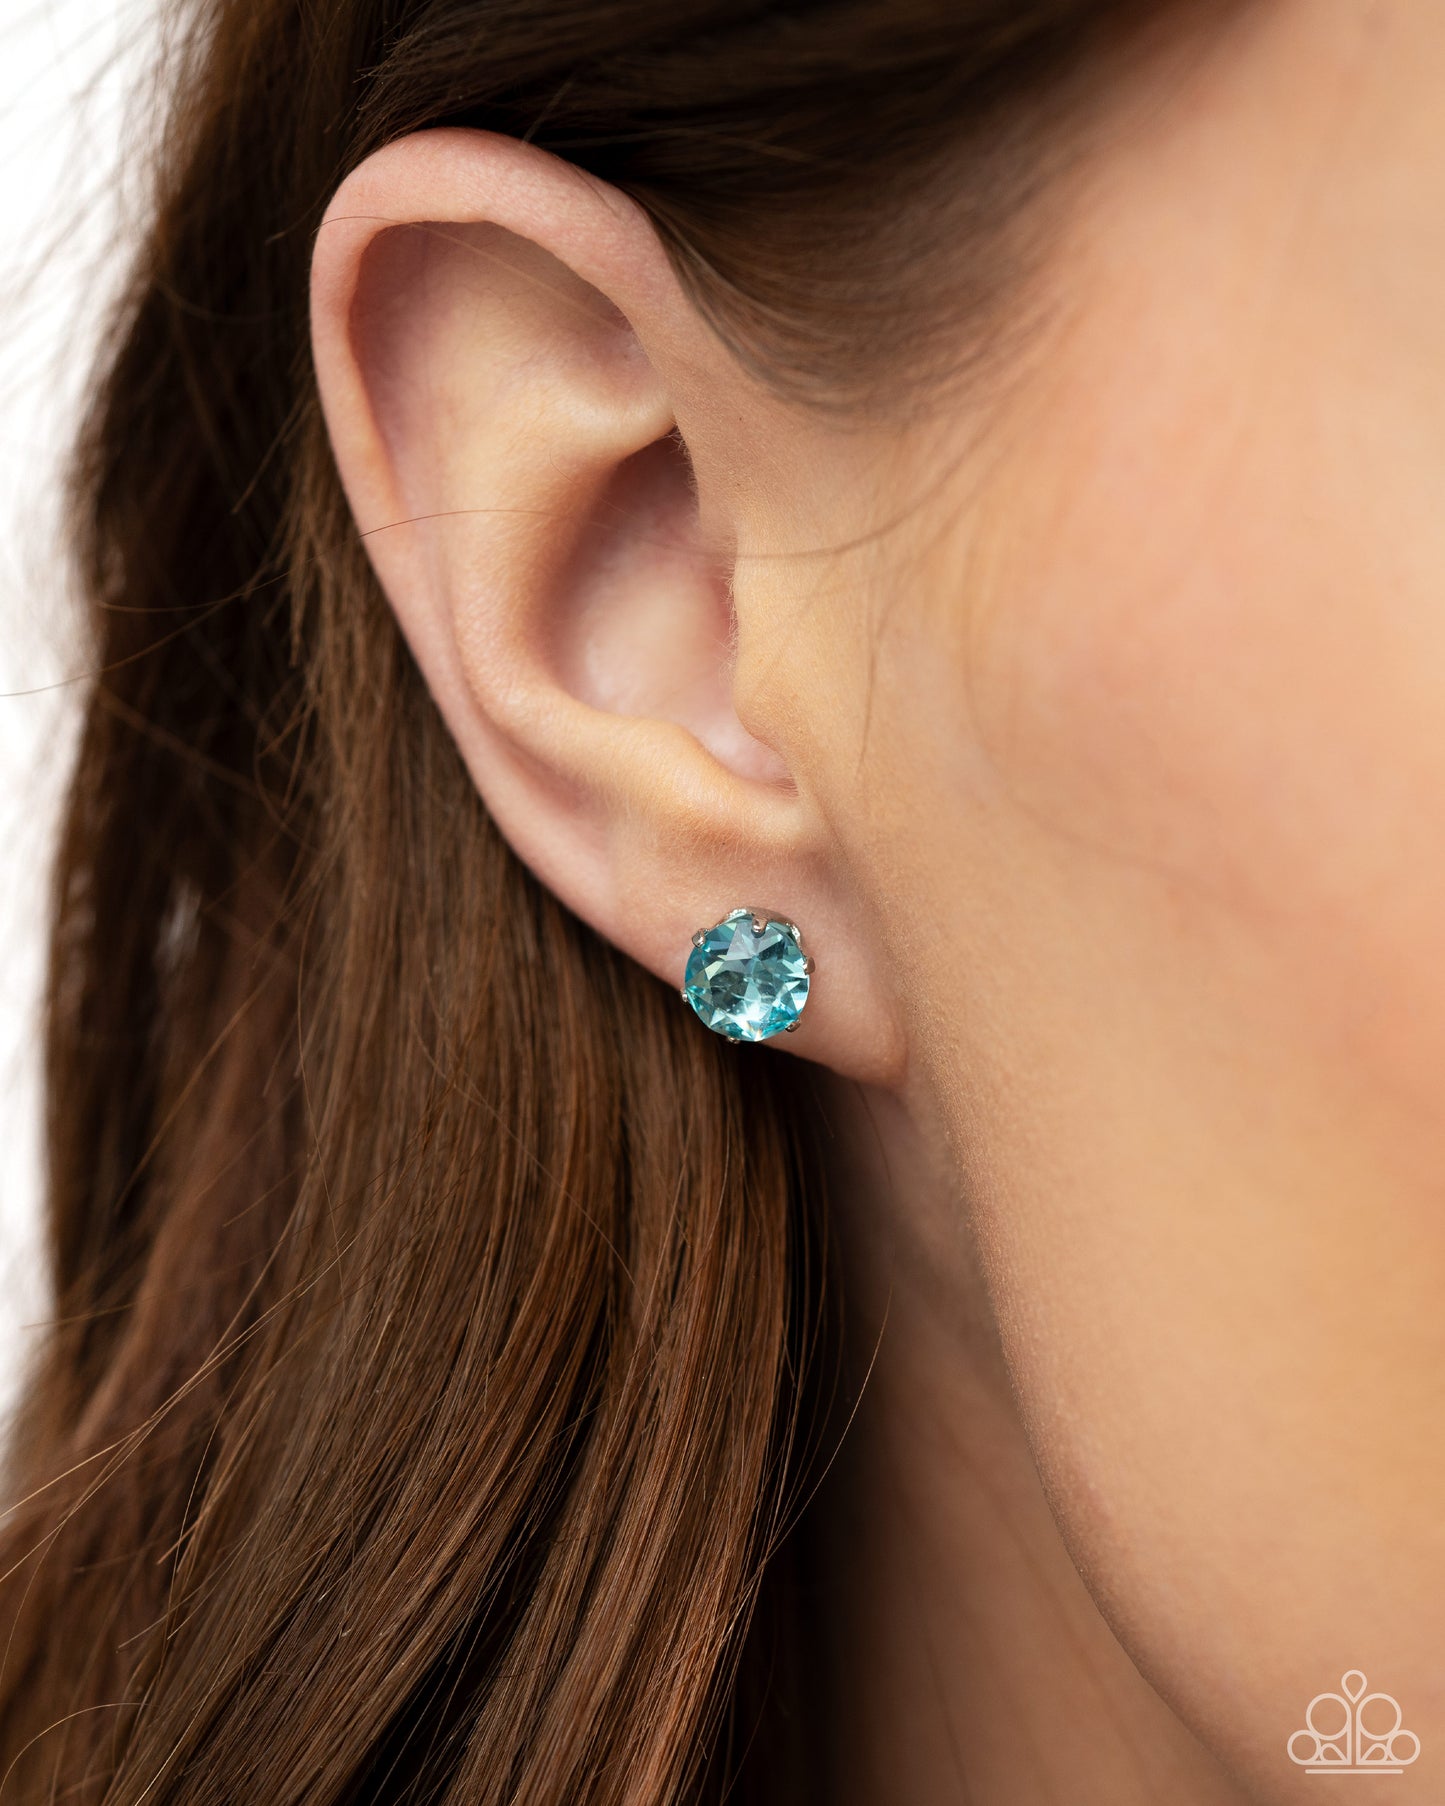 Breathtaking Birthstone Blue Post Earring - Paparazzi Accessories  A sparkling aquamarine rhinestone is nestled inside a classic silver frame for a beautiful birthstone-inspired display. Earring attaches to a standard post fitting.  Sold as one pair of post earrings.  P5PO-BLXX-173TX-3